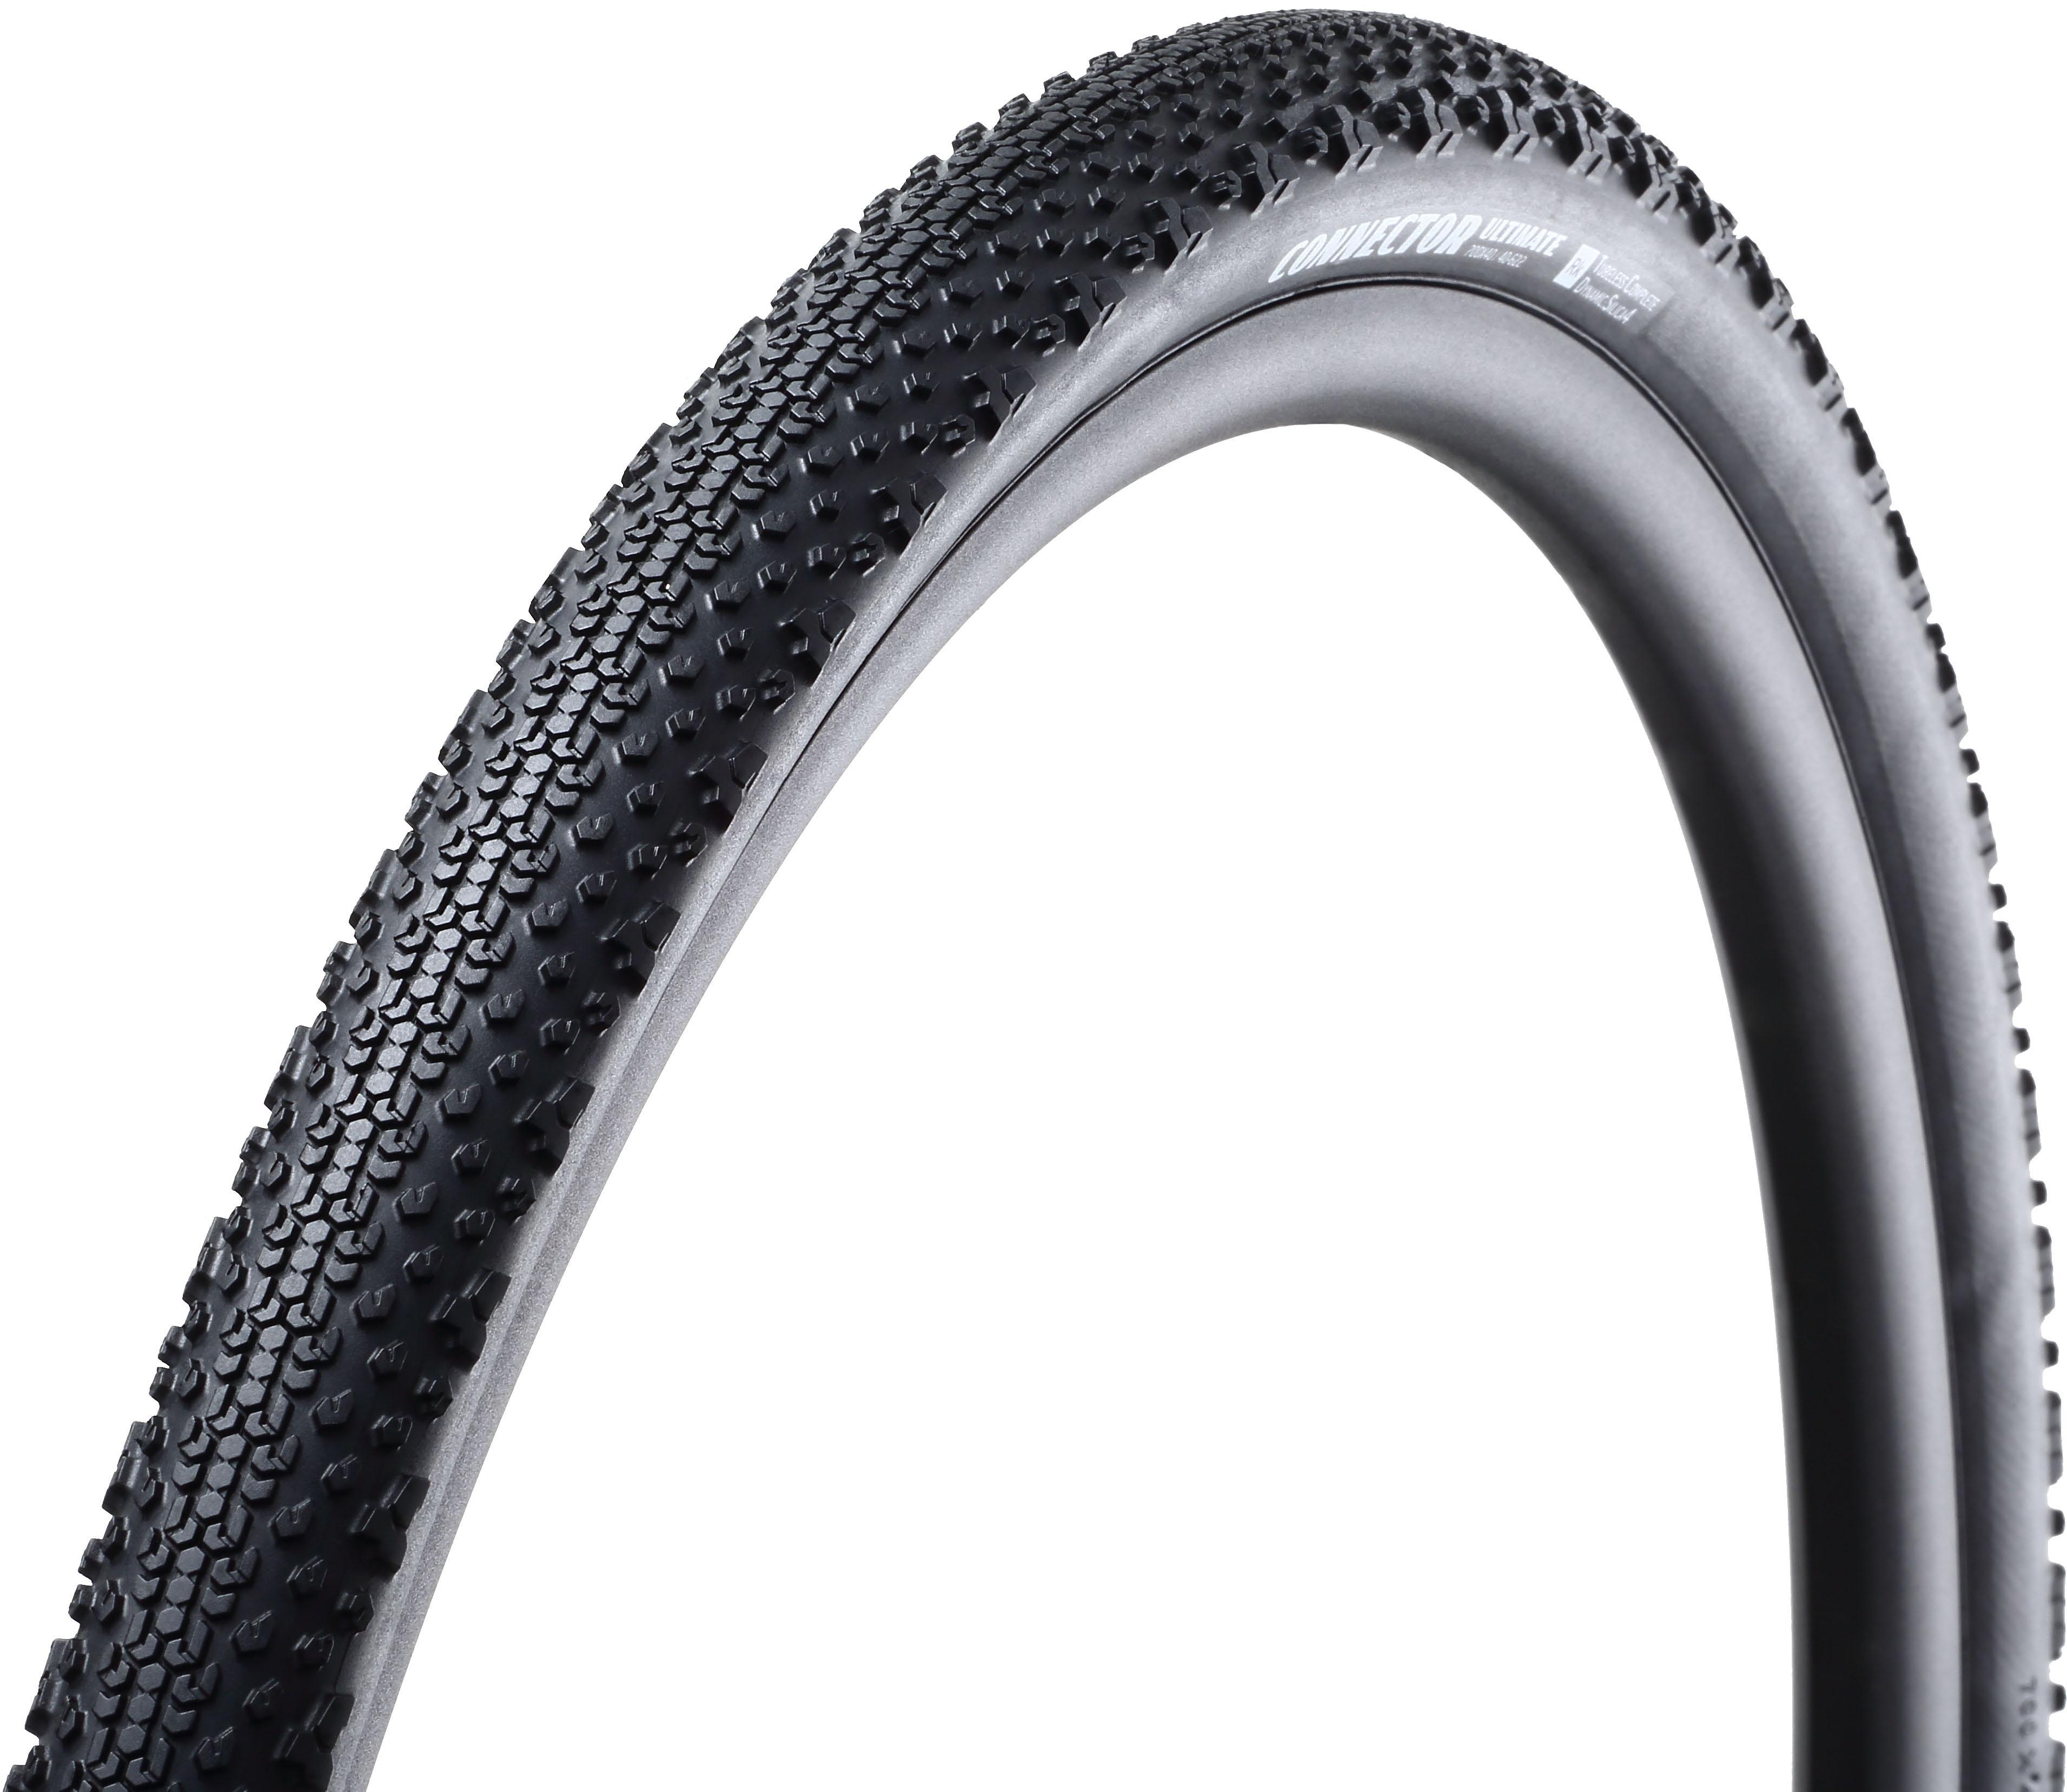 Connector Ultimate Tubeless Cyclocross Tyre - 700c